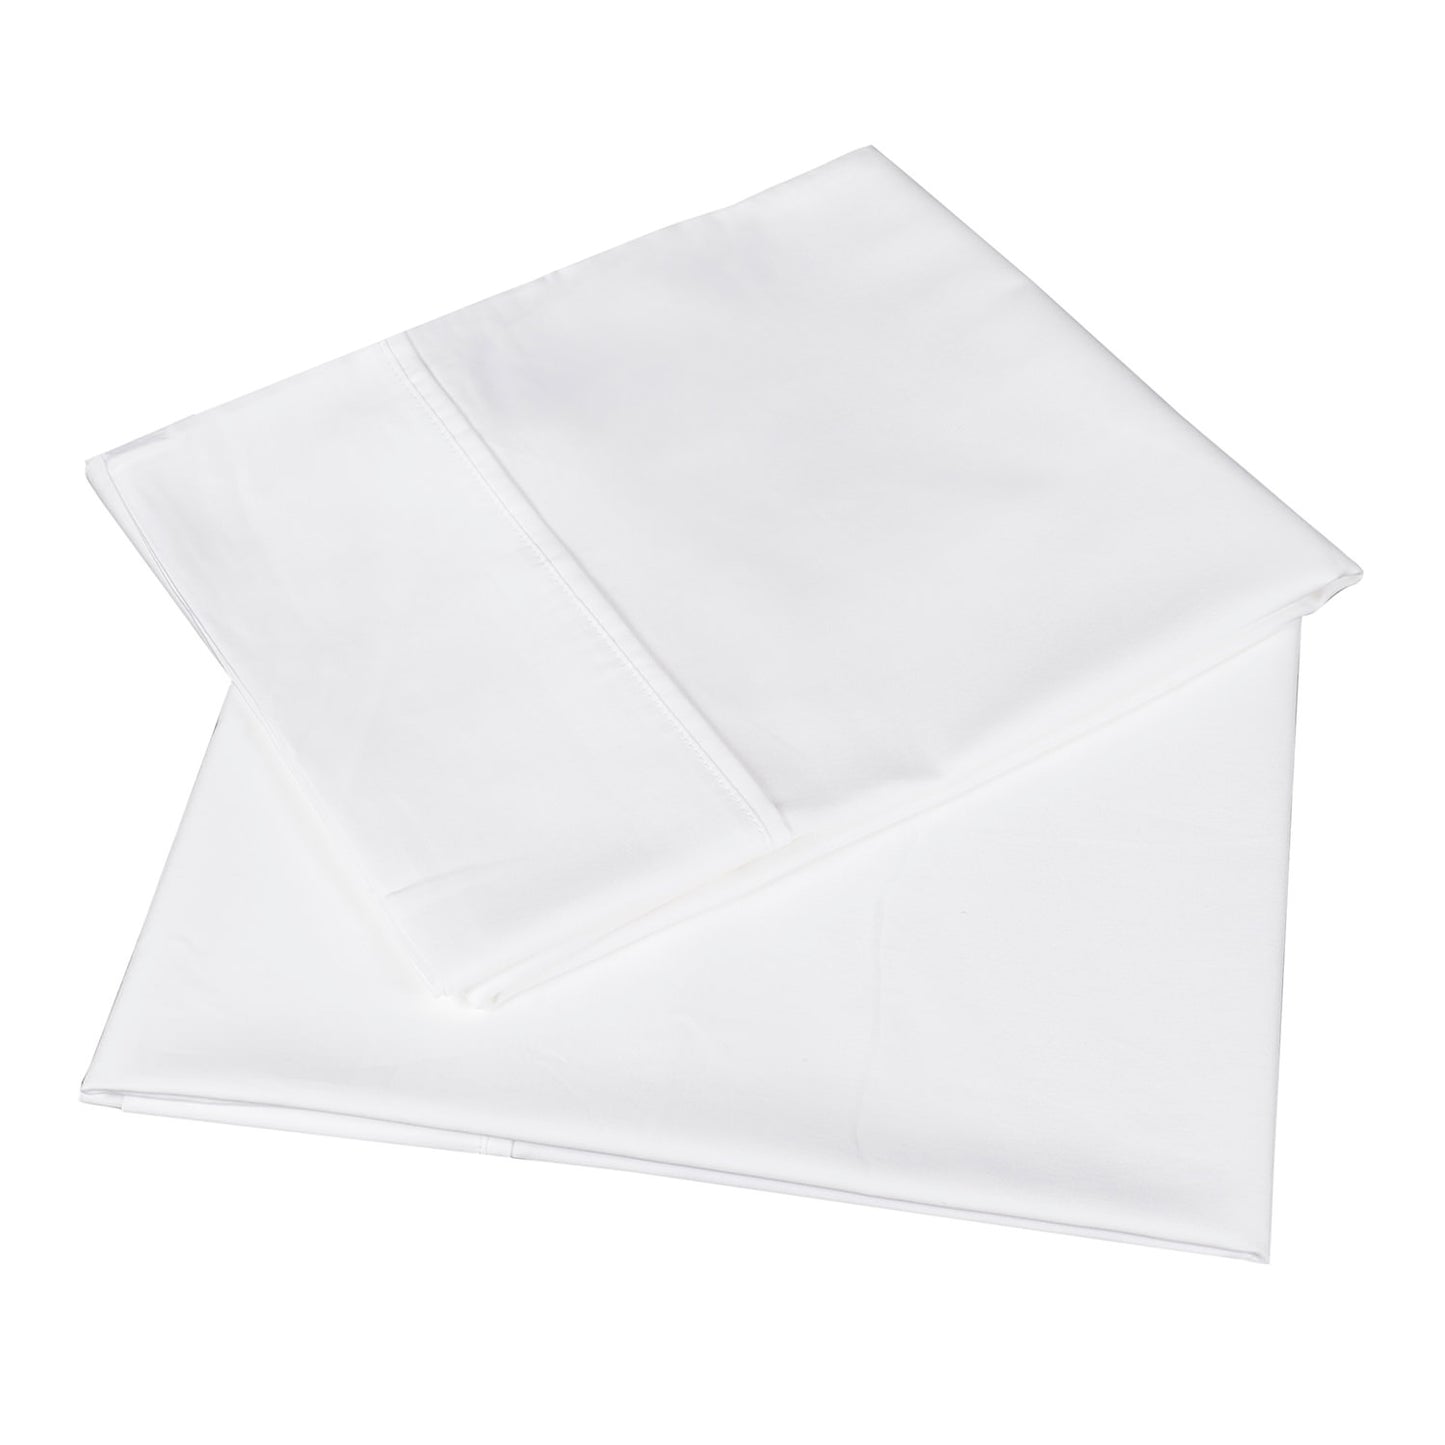 PILLOW CASES SET OF 2 , 400 THREAD COUNT 100% COTTON